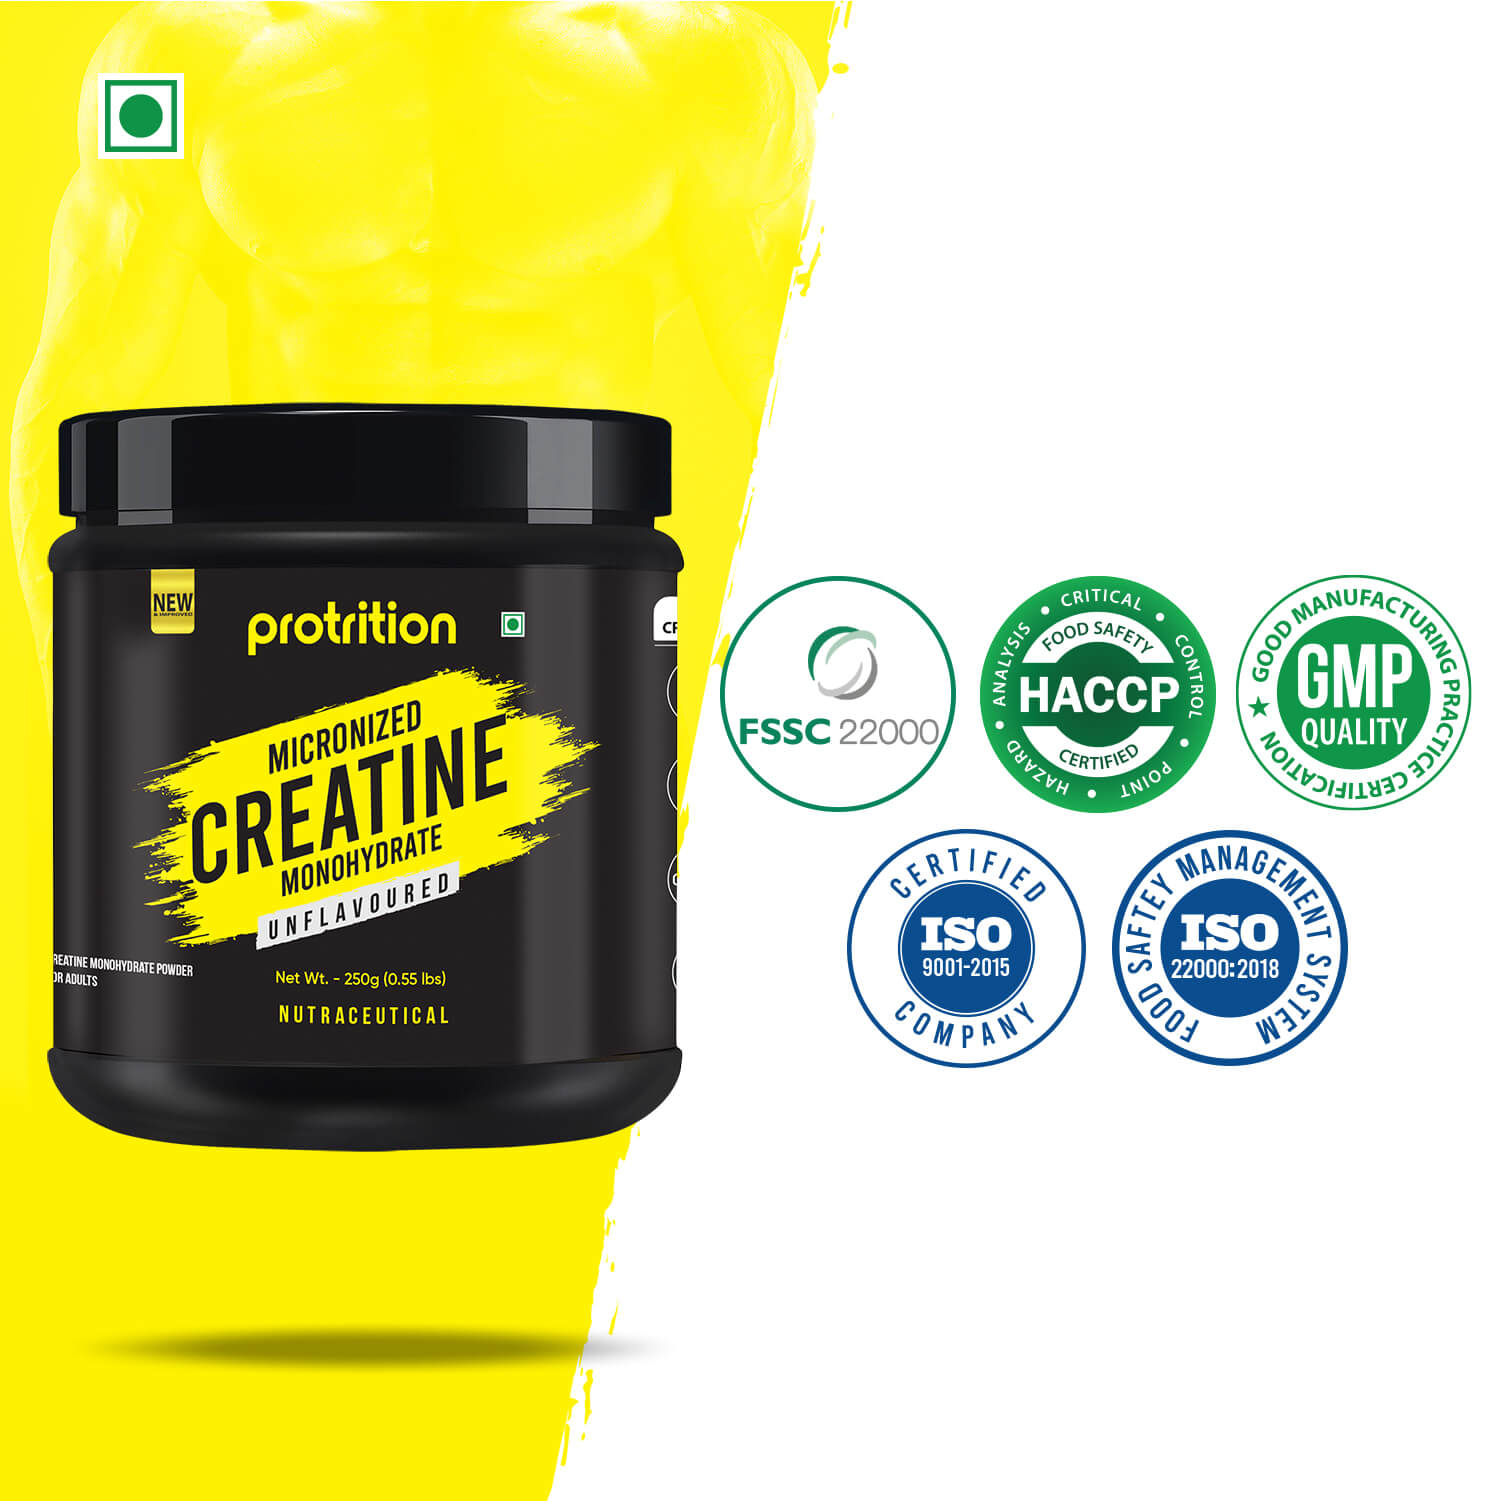 Protrition Micronized Creatine Monohydrate, 250g, Unflavoured